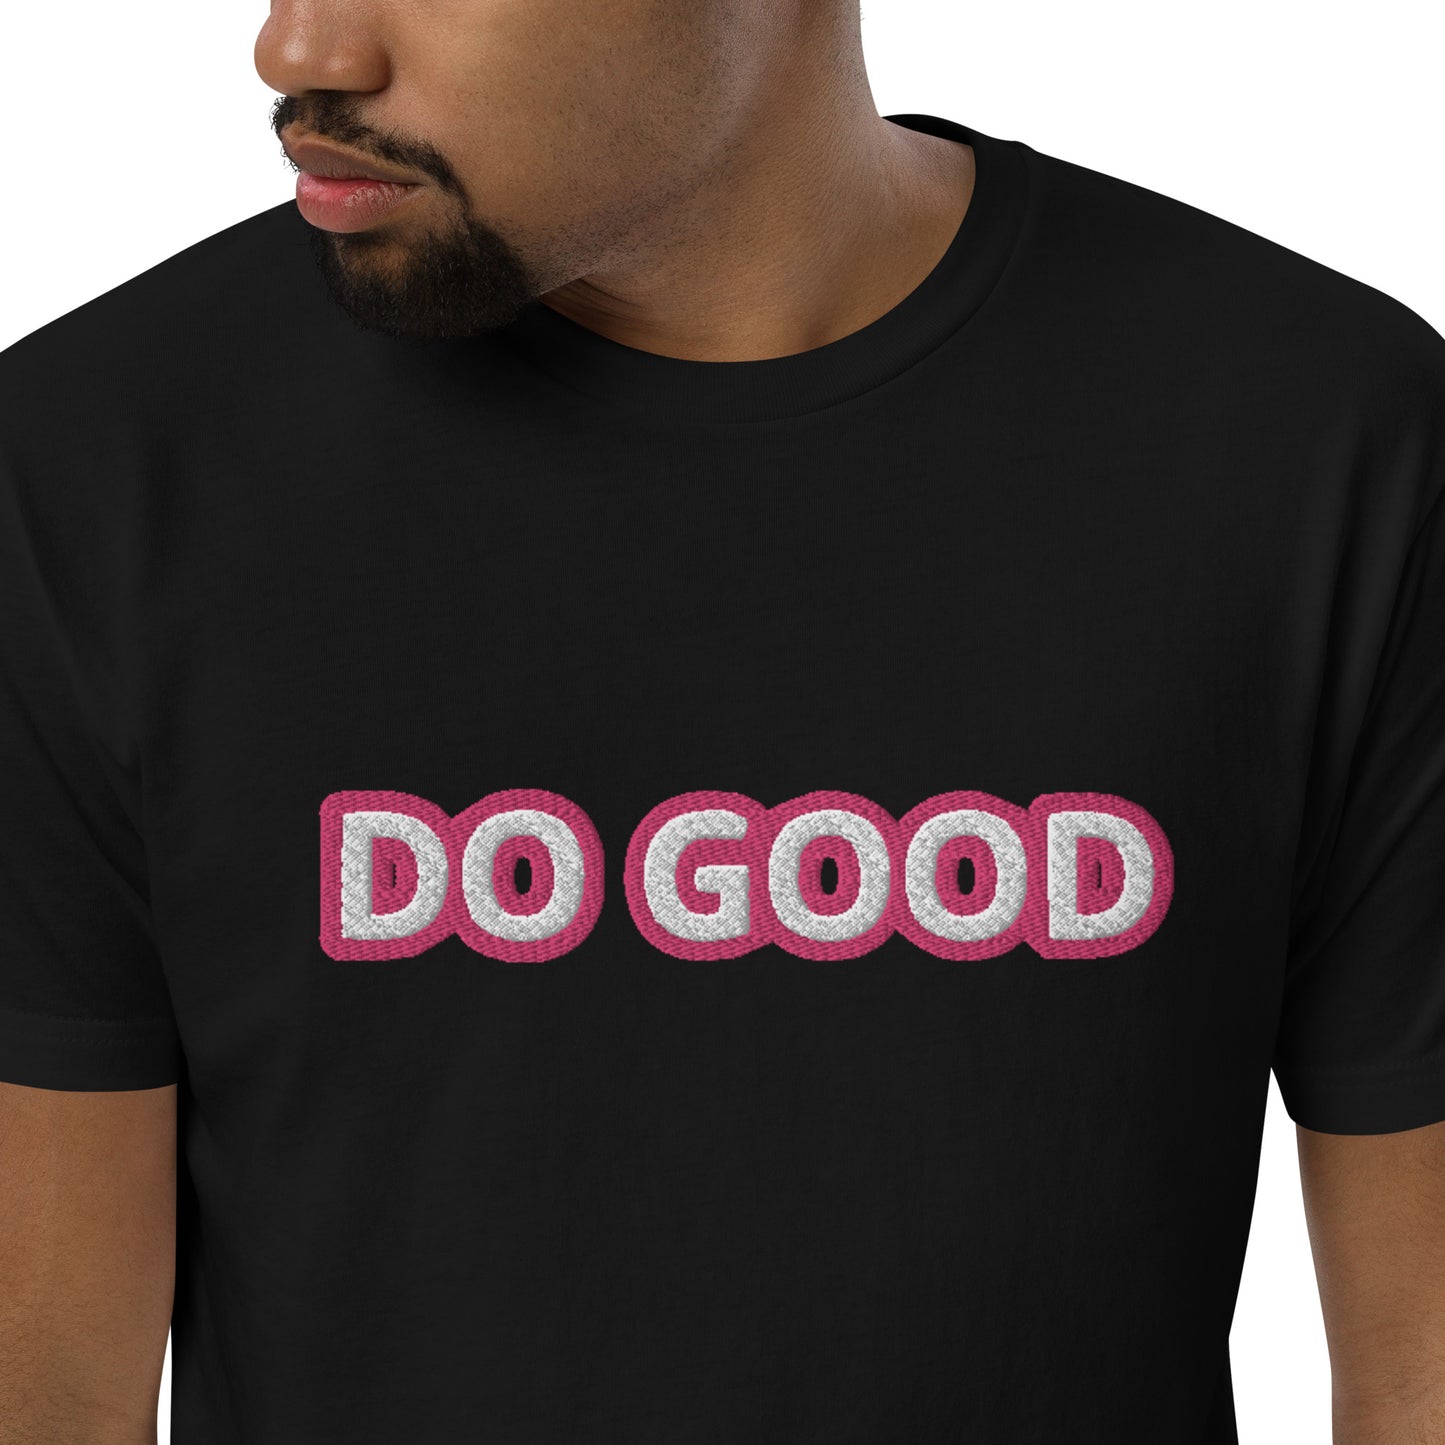 "DO GOOD" Embroidered T-shirt (Athletic Fit)